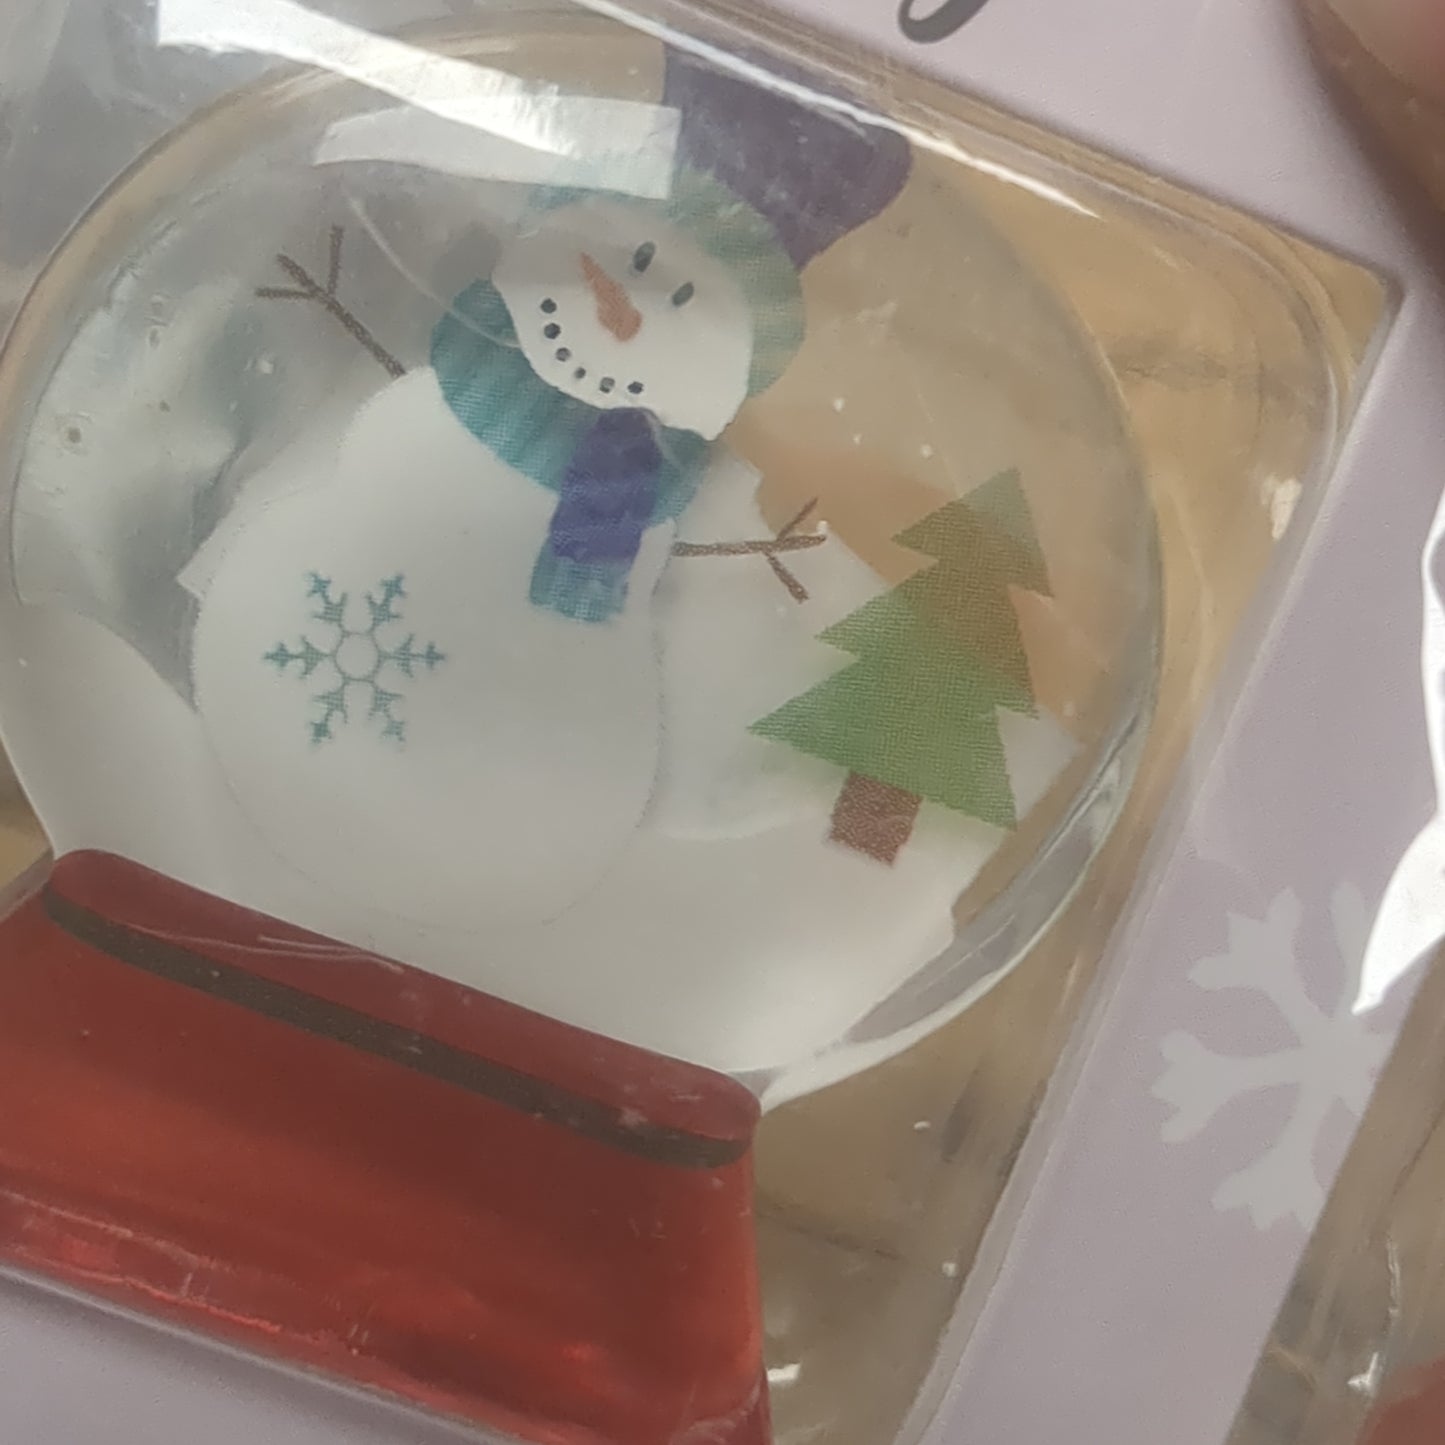 Pocket charm snow globe appearance with snowman inside. friends Make Christmas Merry